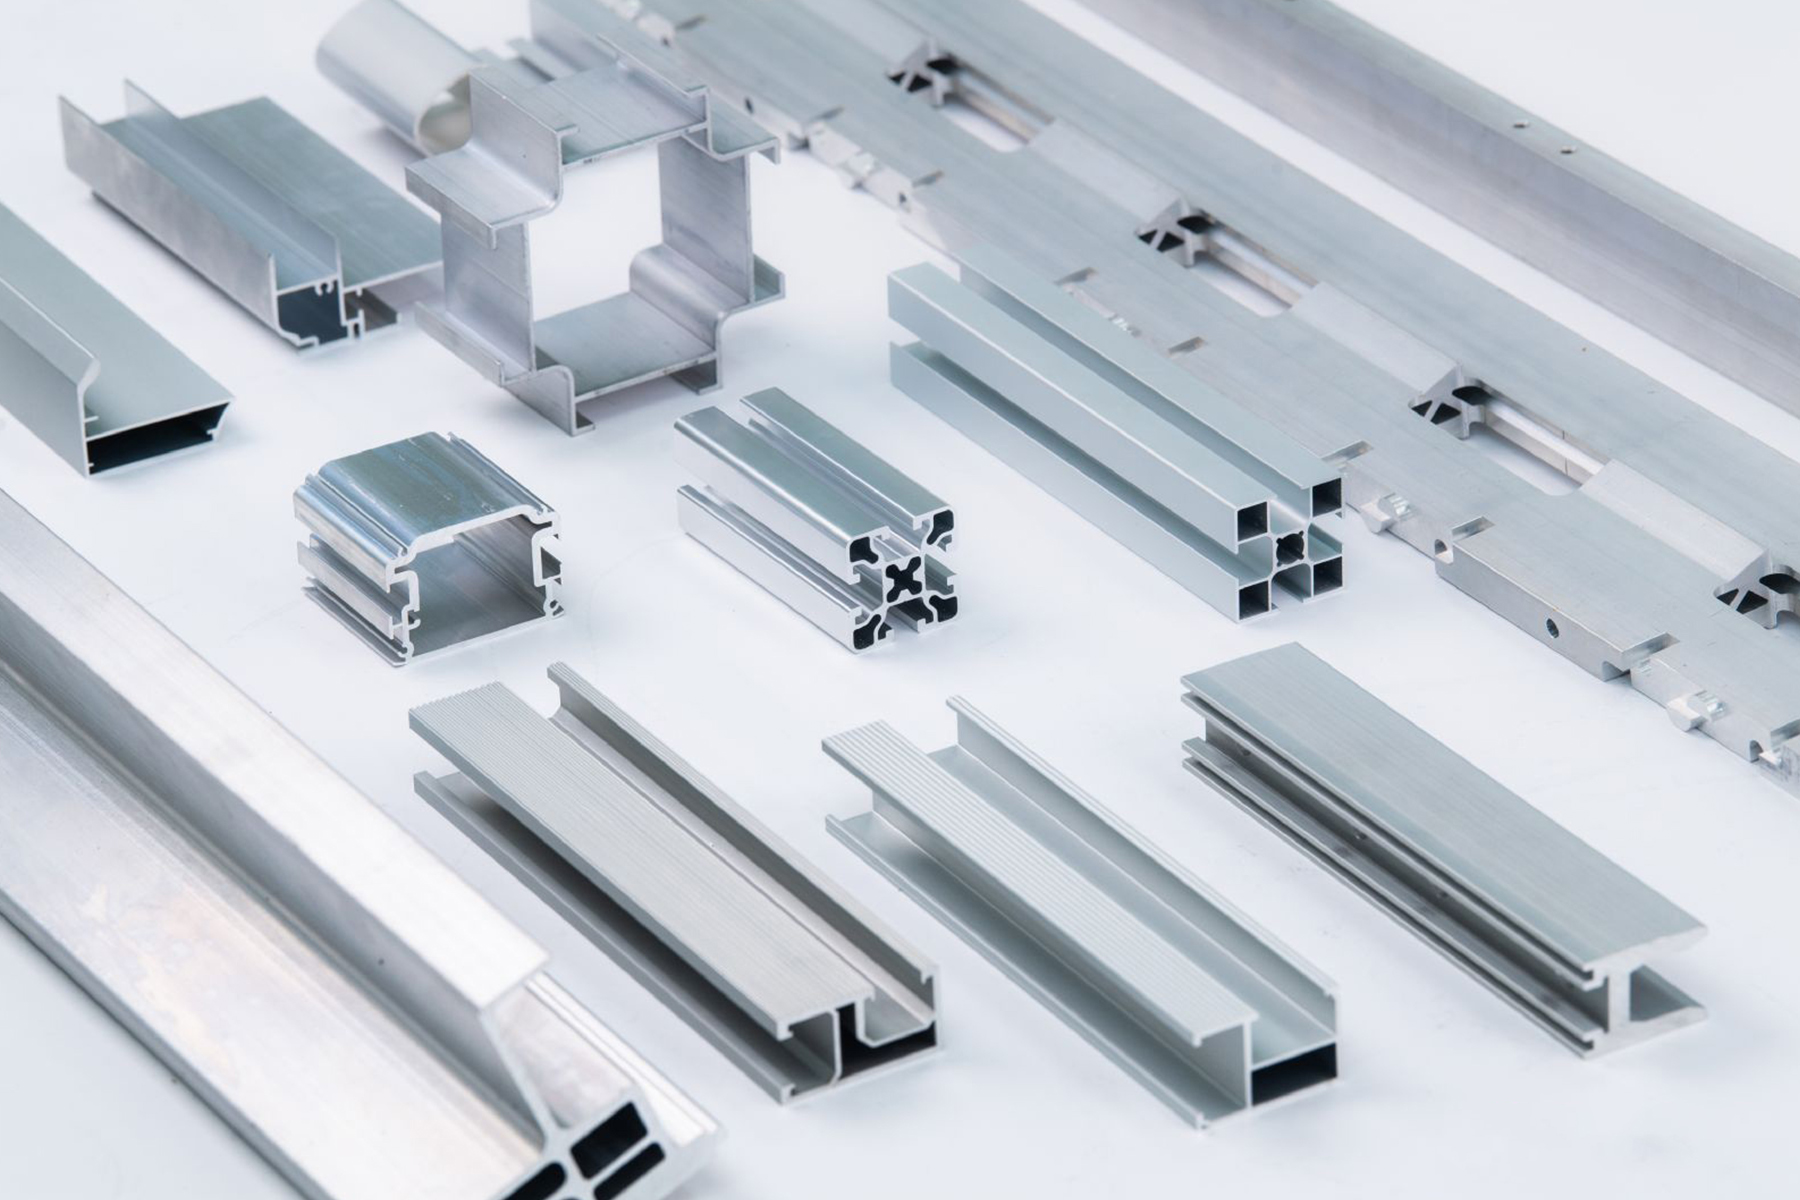 What matters should be paid attention to when extruding industrial aluminum alloy profiles?